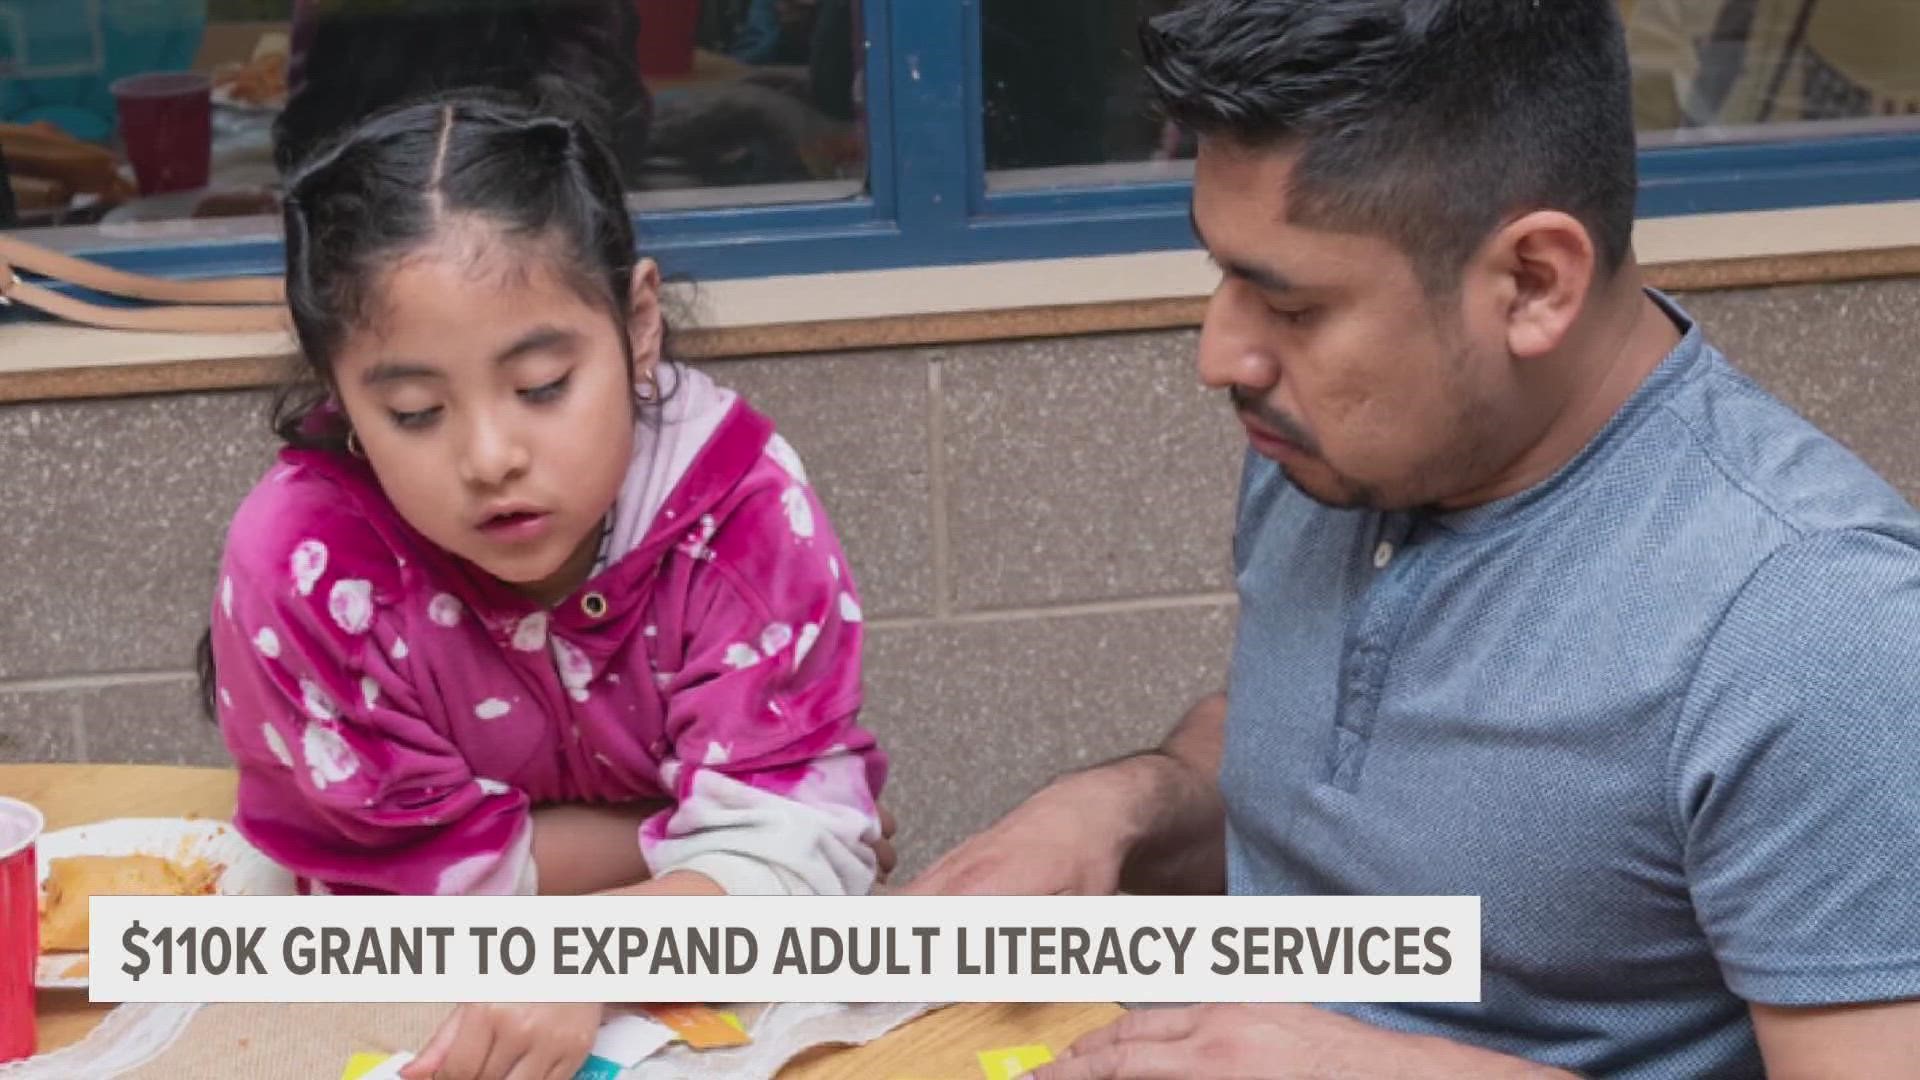 The Center's family program currently teaches English language skills to more than 200 parents and caregivers each year in connection with their child's school.